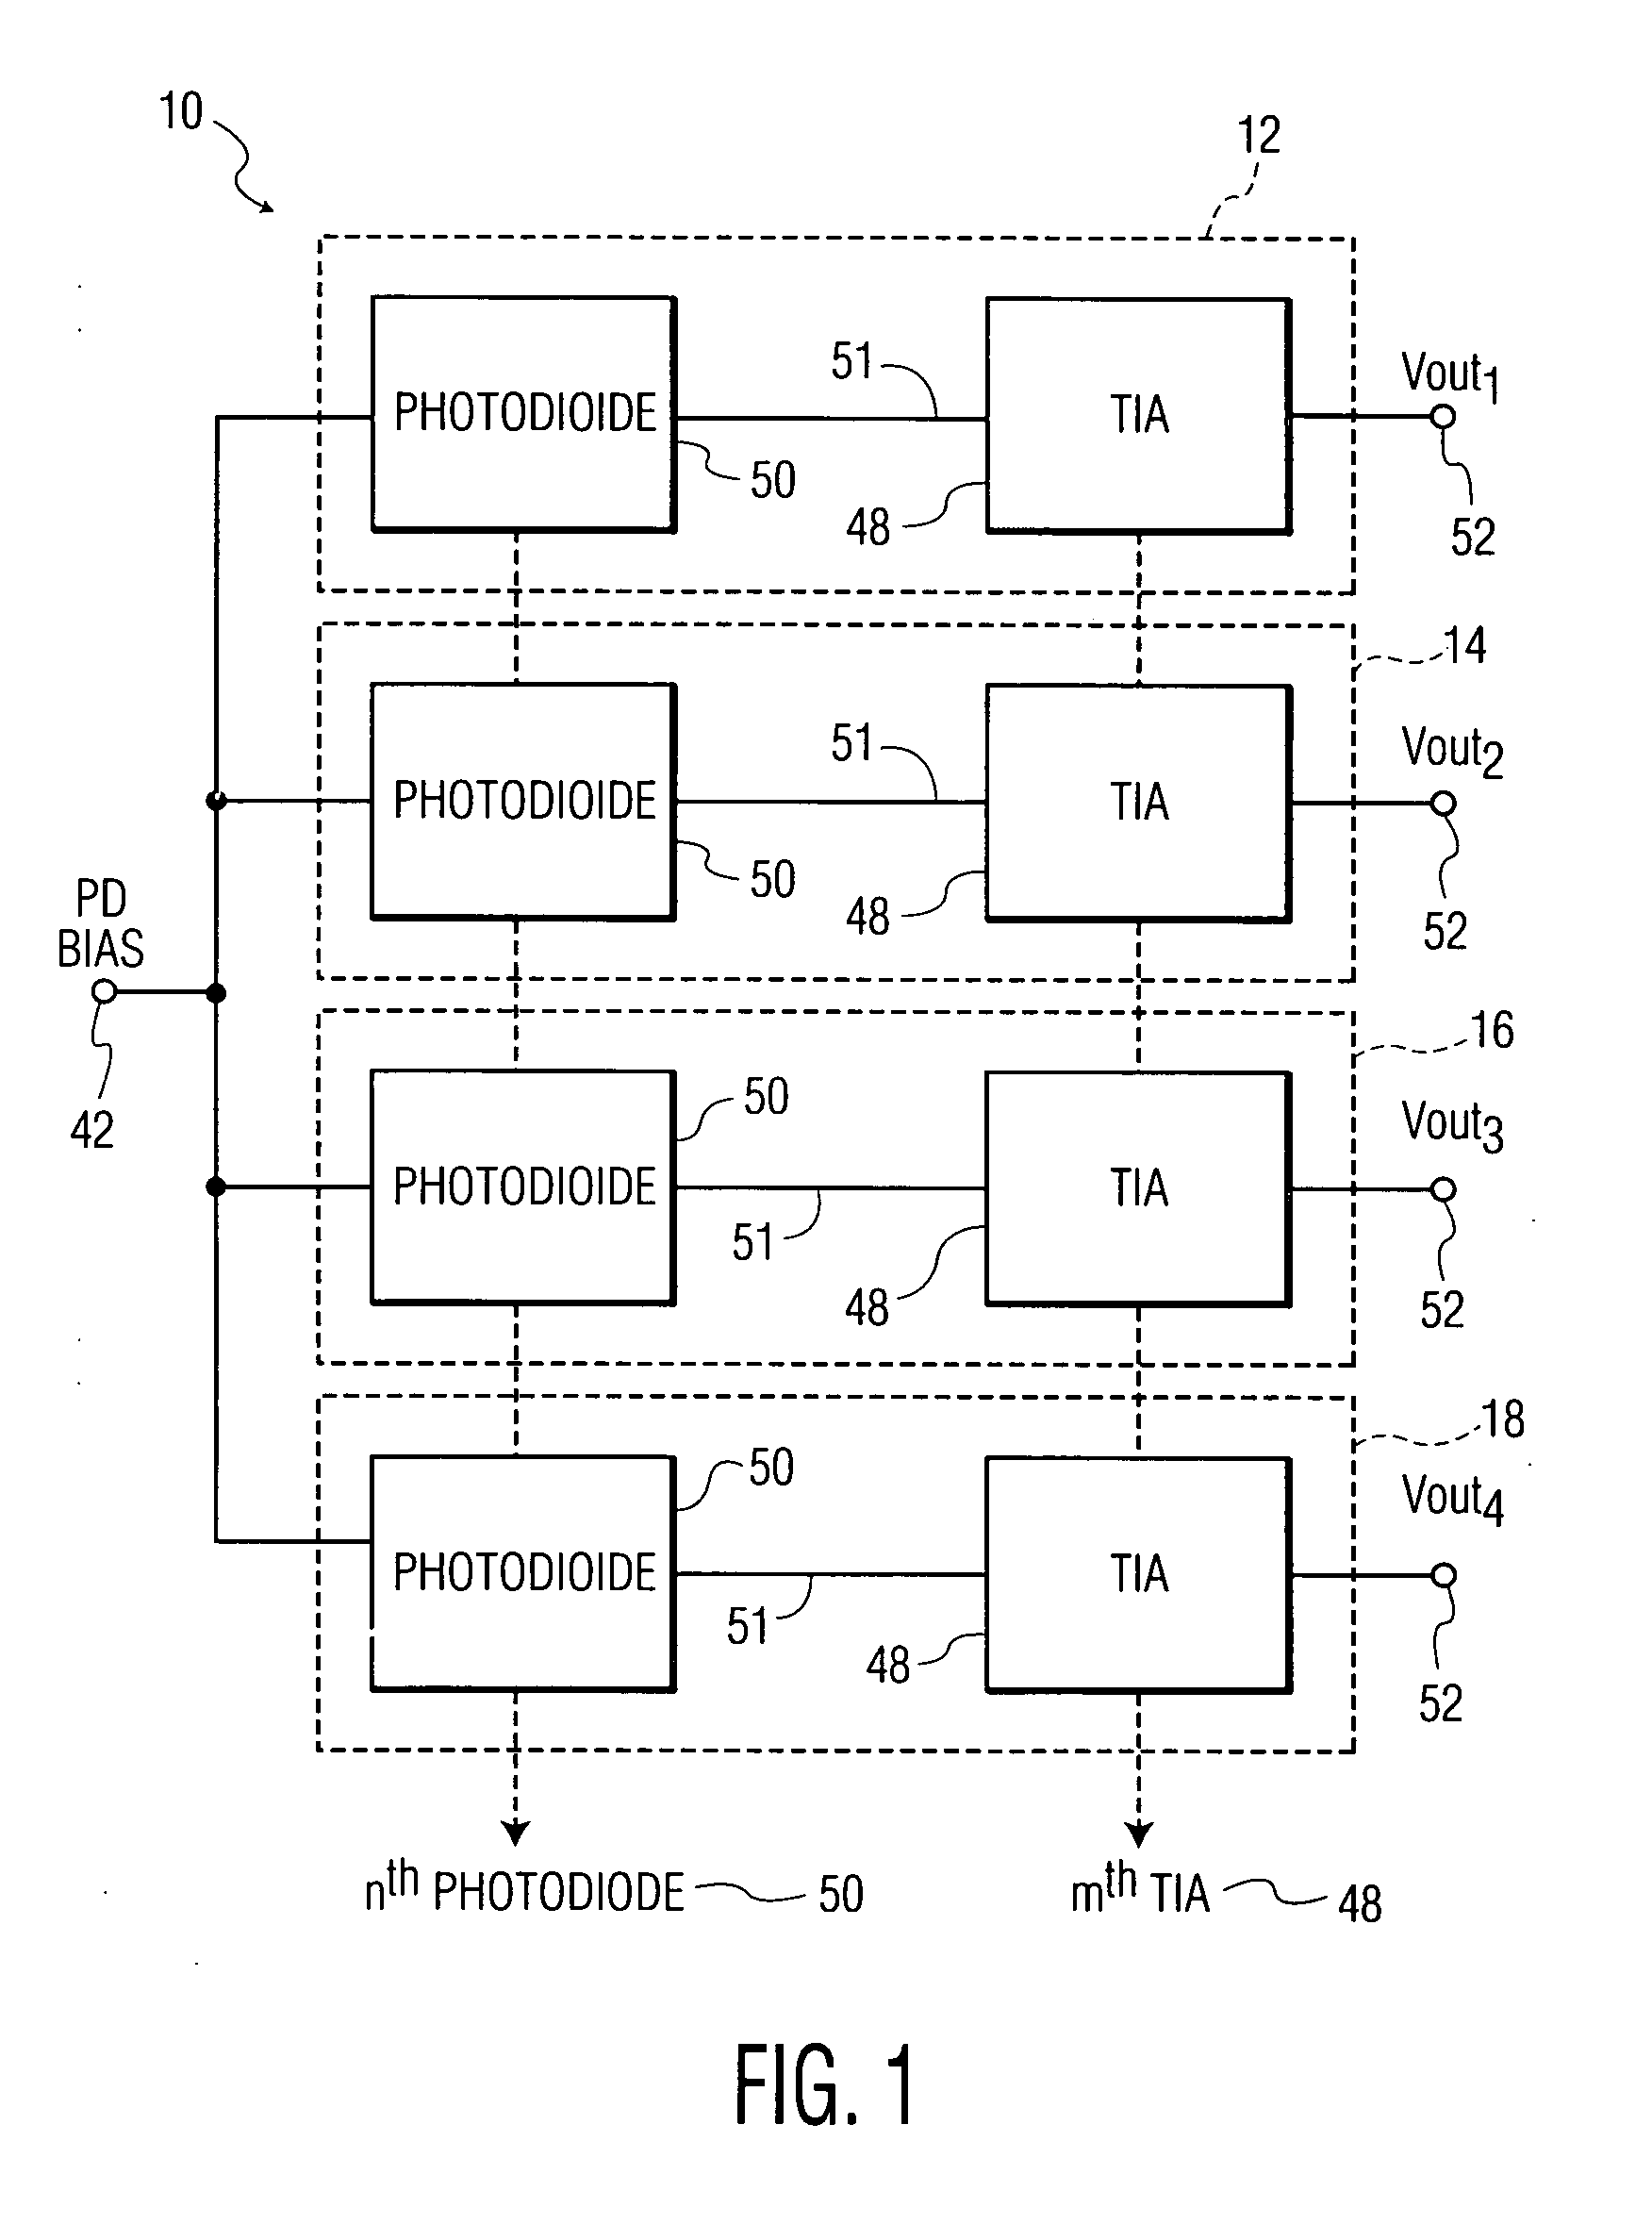 Low-noise large-area photoreceivers with low capacitance photodiodes